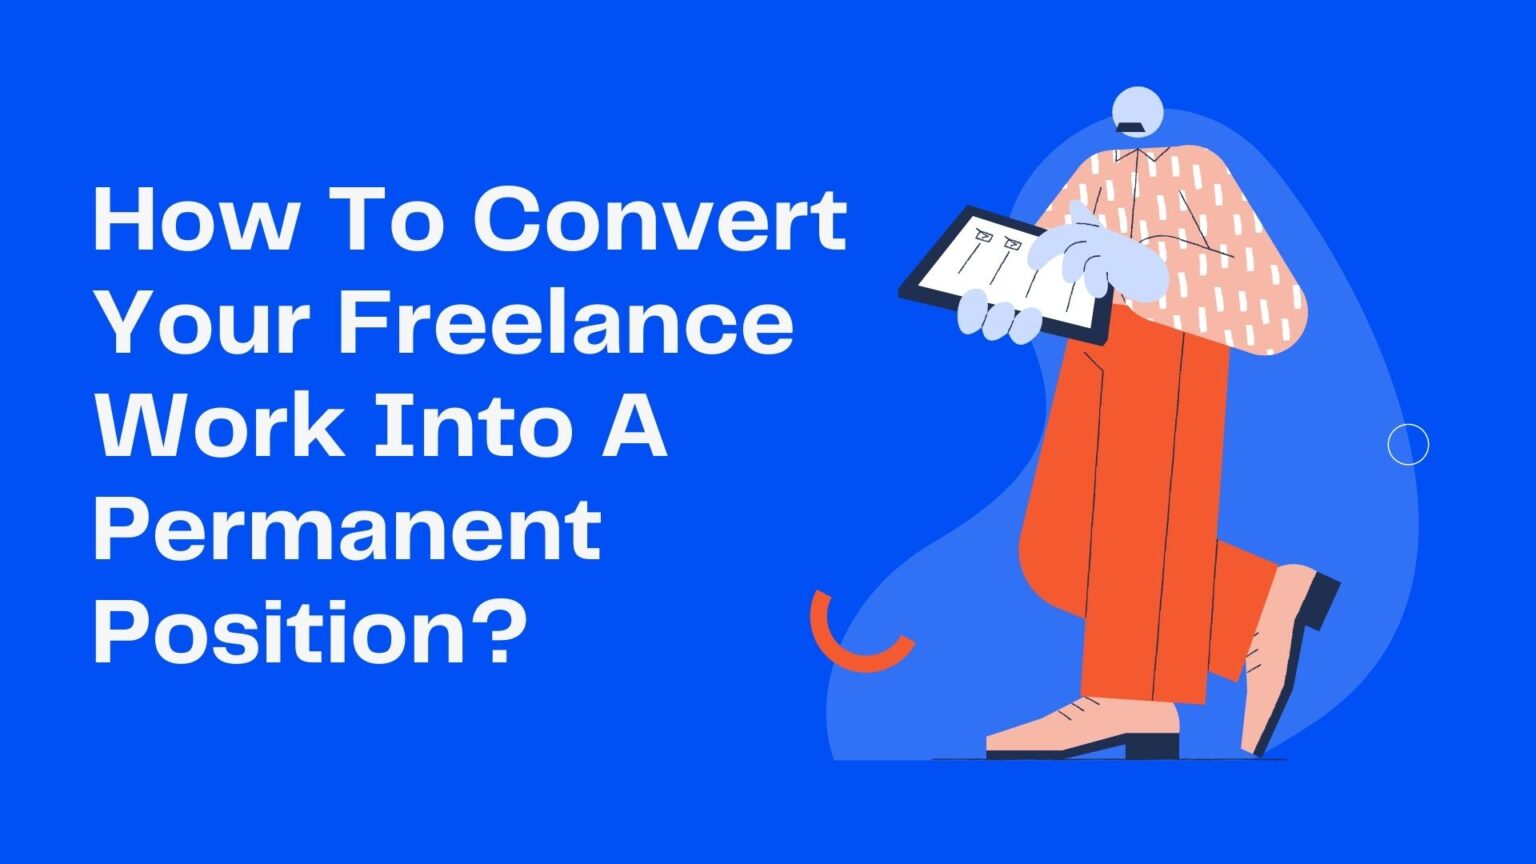 How To Convert Your Freelance Work Into A Permanent Position Unleash Cash 0607